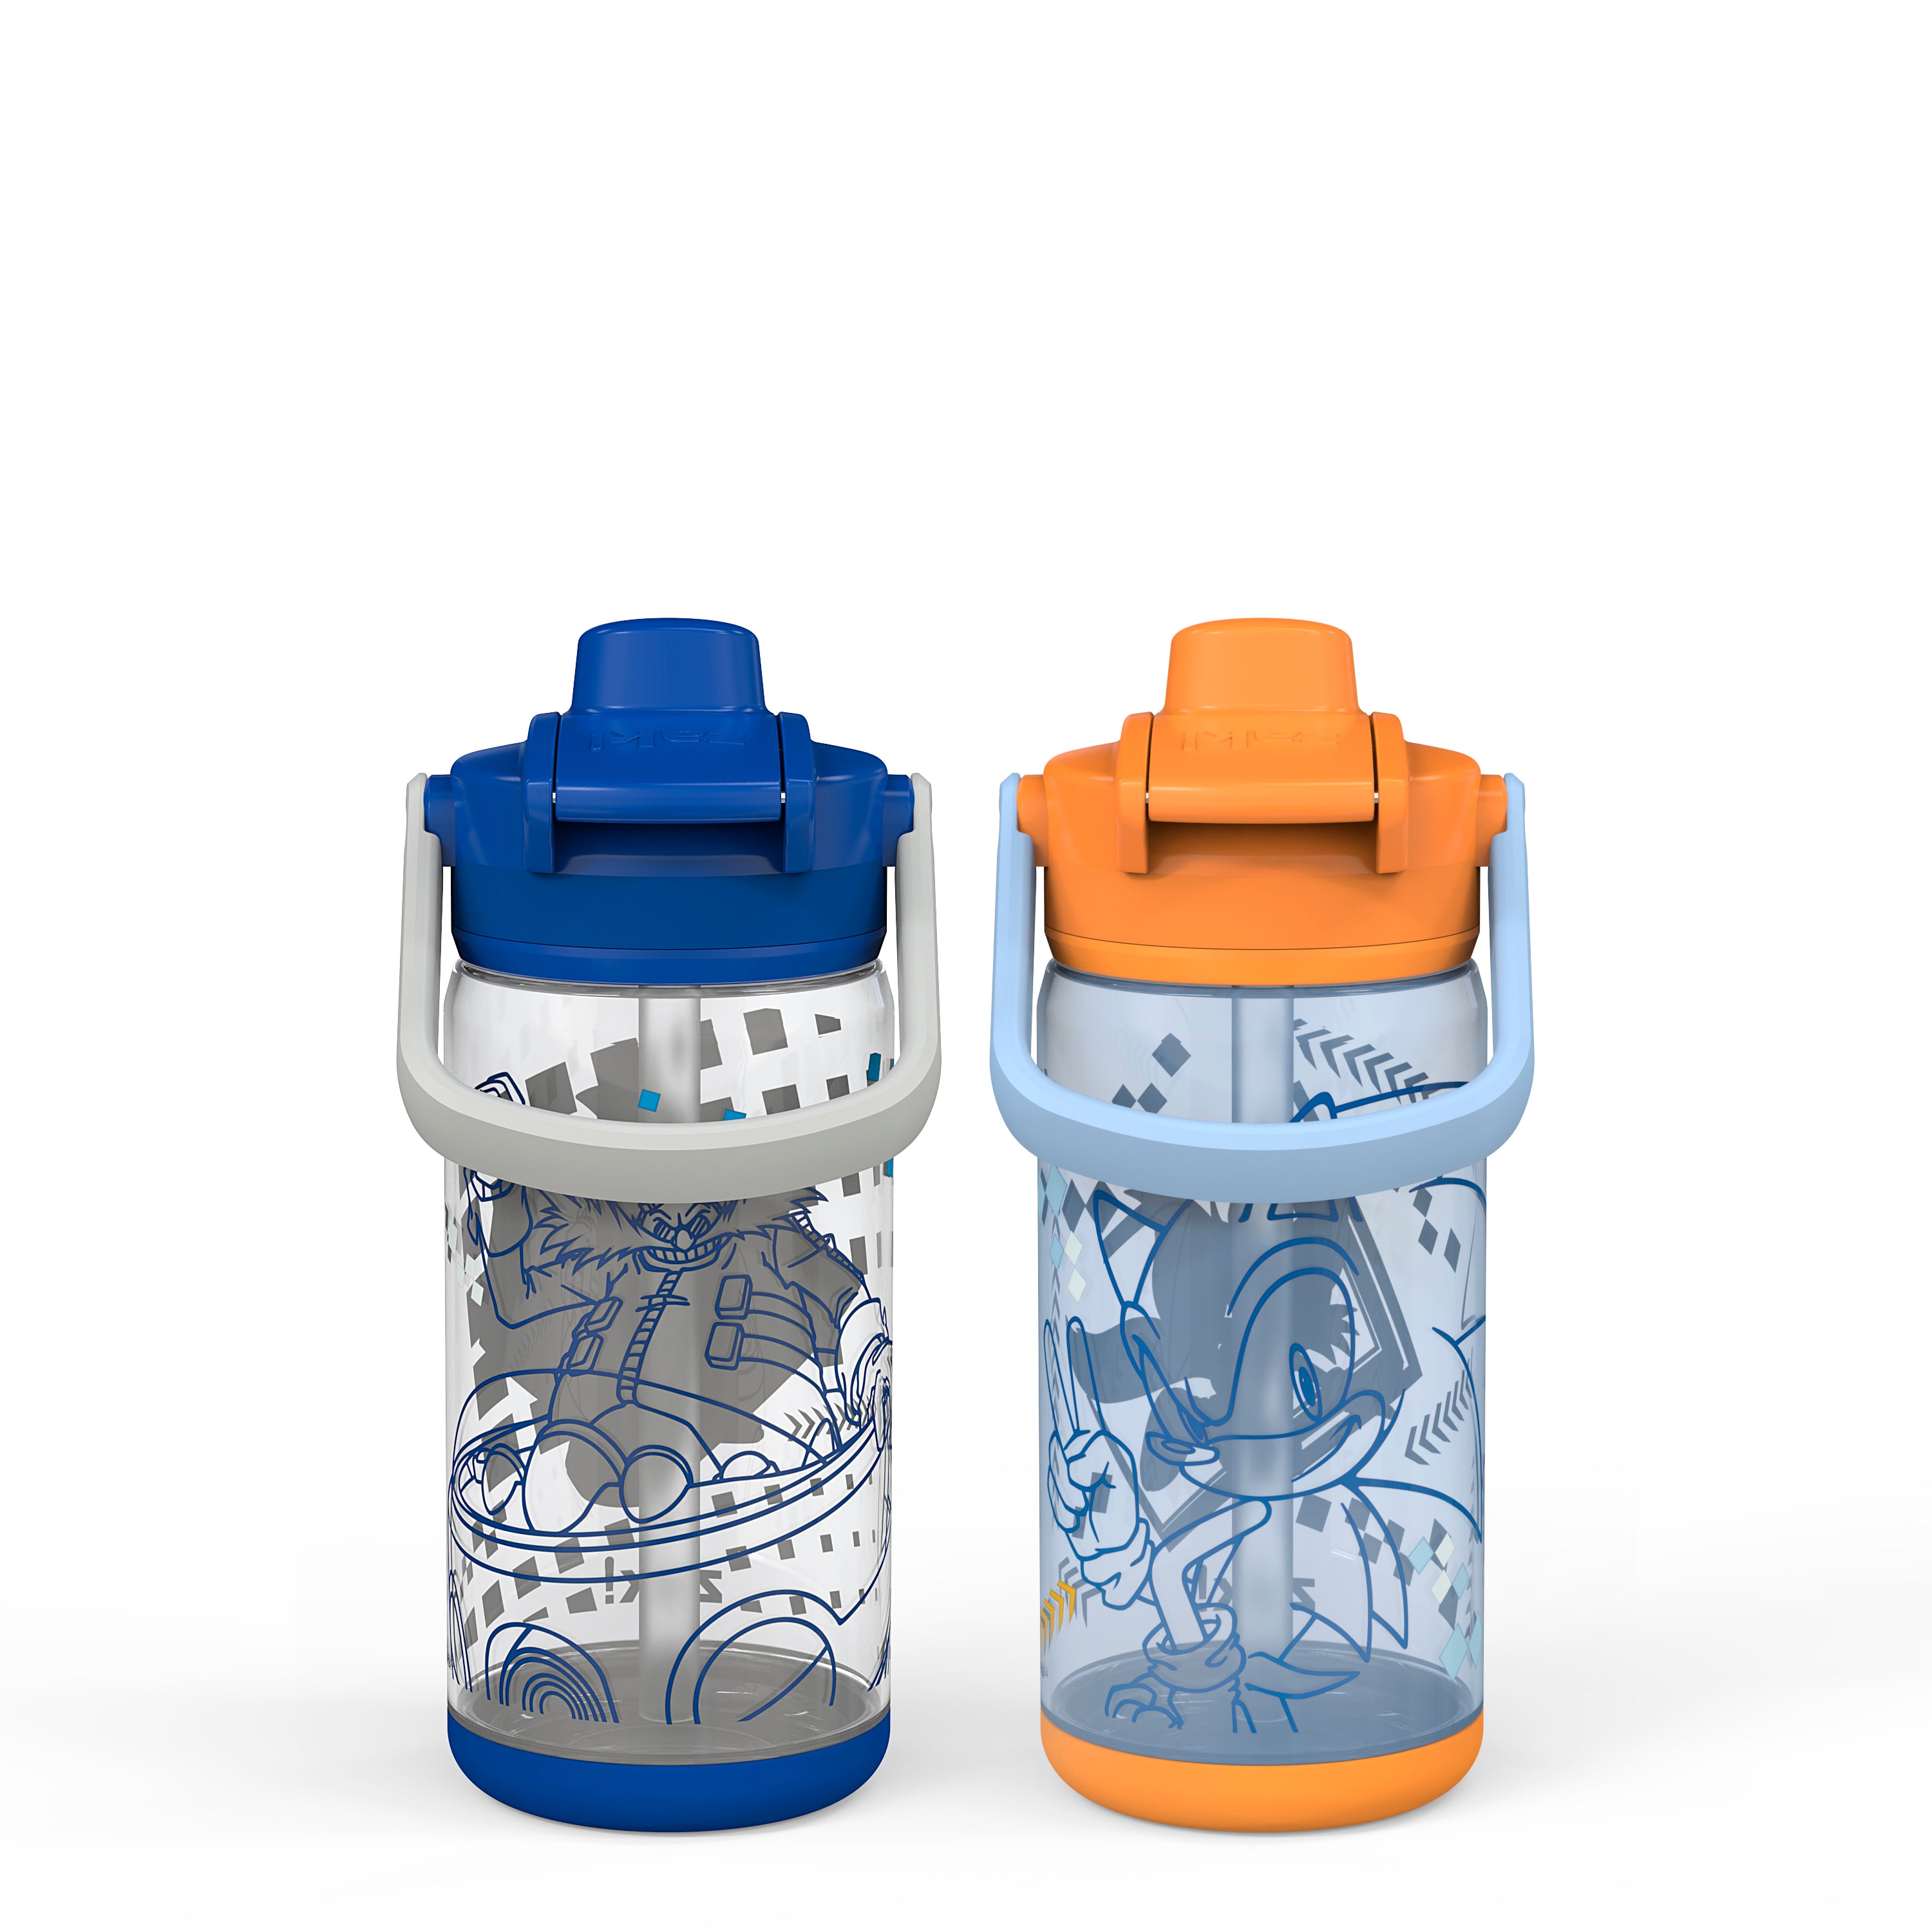 Bluey Beacon 2-Piece Kids Water Bottle Set with Covered Spout, 16 Ounces